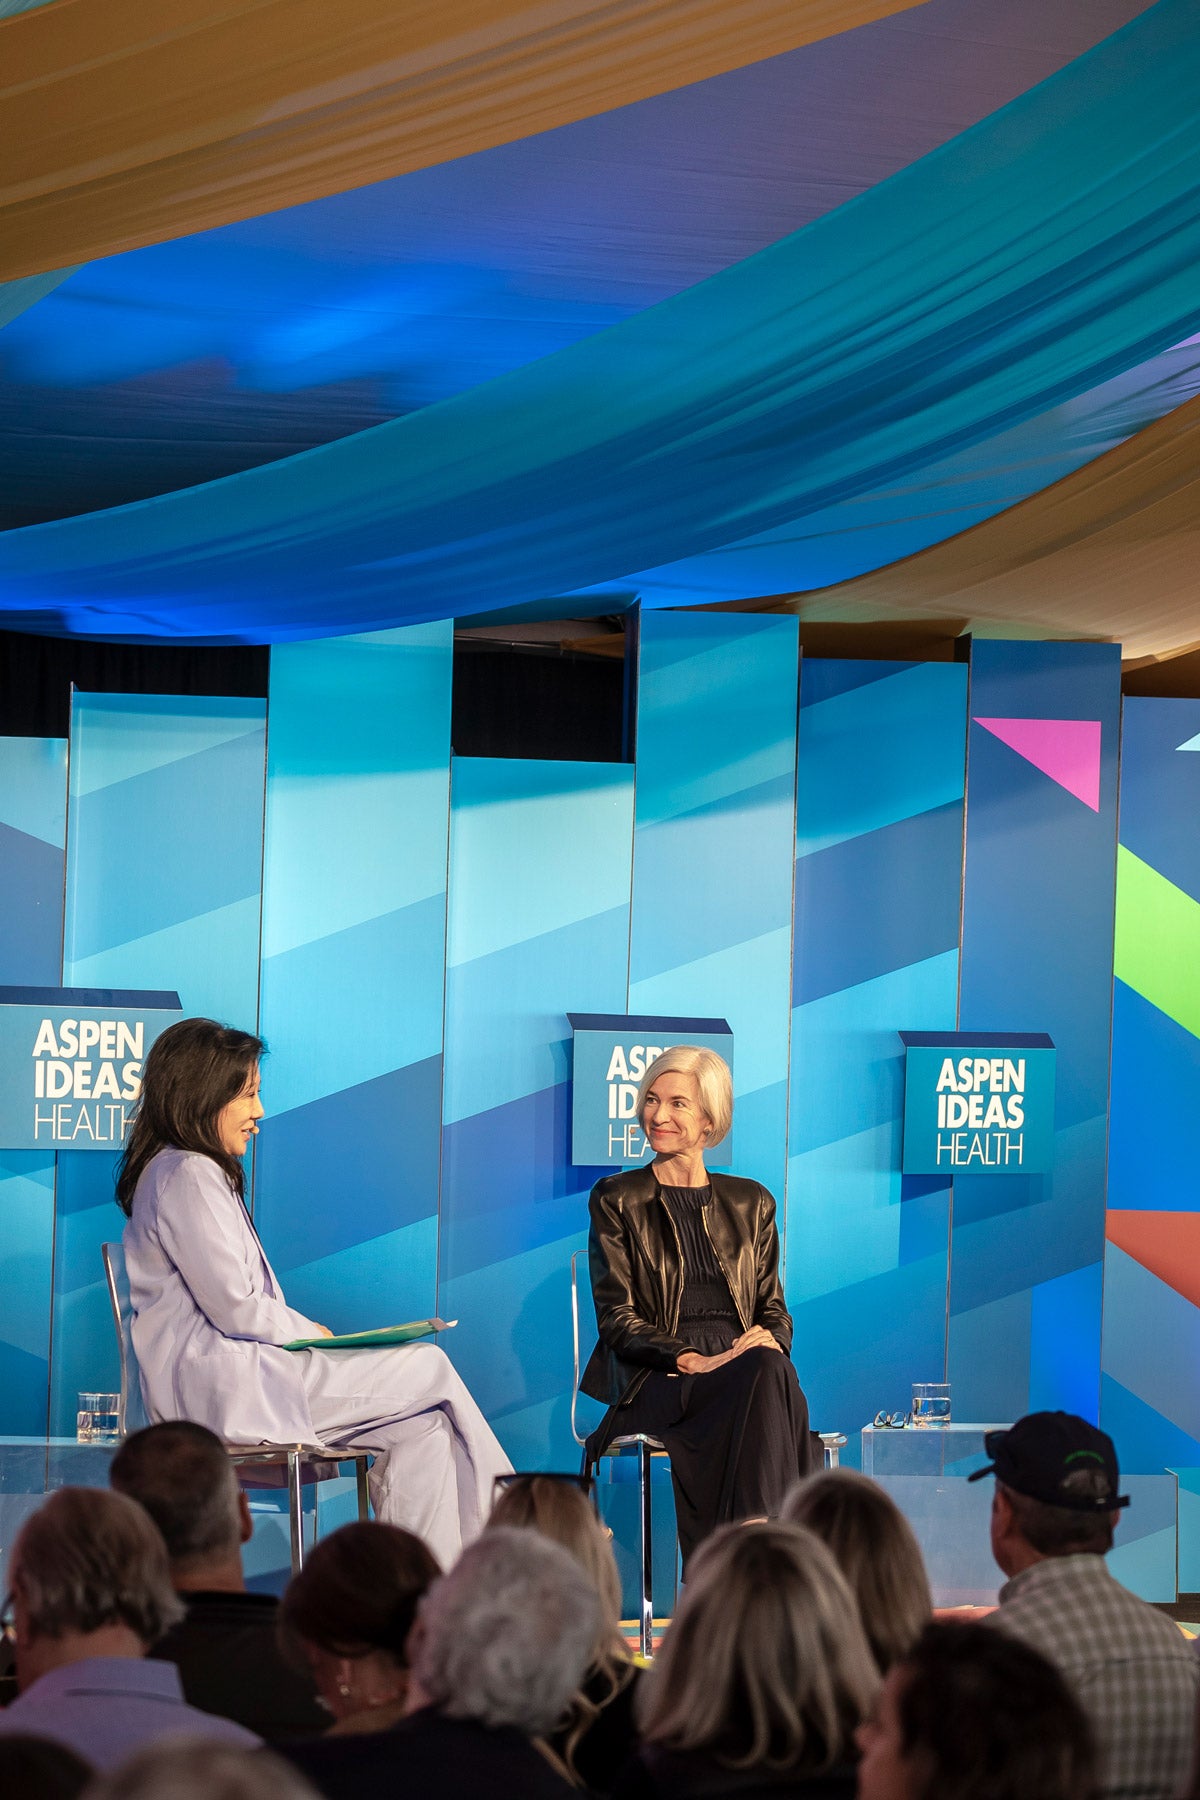 Alice Park and Jennifer Doudna seated on stage for a session talk at the Aspen Ideas Health Conference.